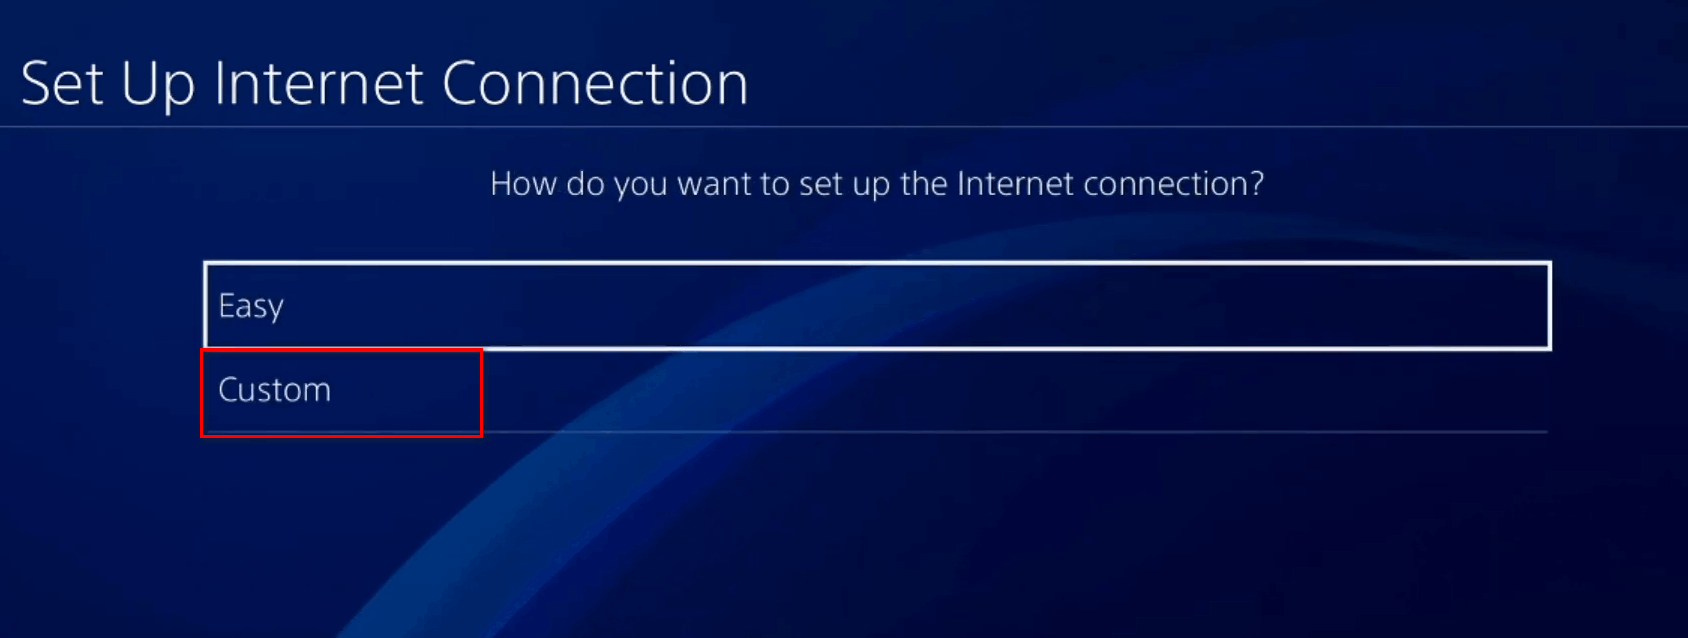 Choose Easy or custom to connect PS4 to Wi-Fi